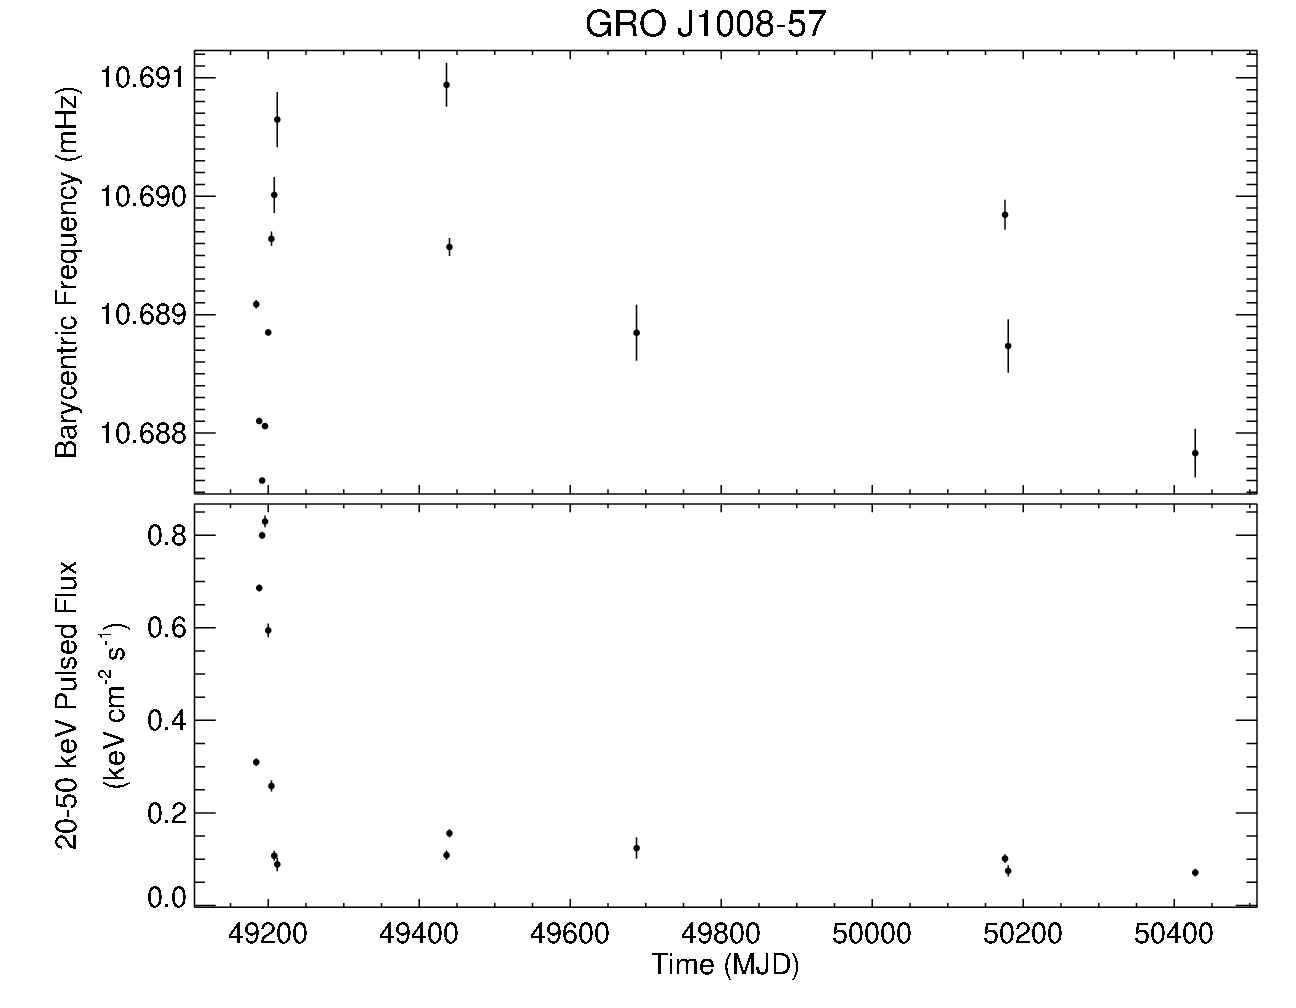 GRO J1008-57 Short Frequency History